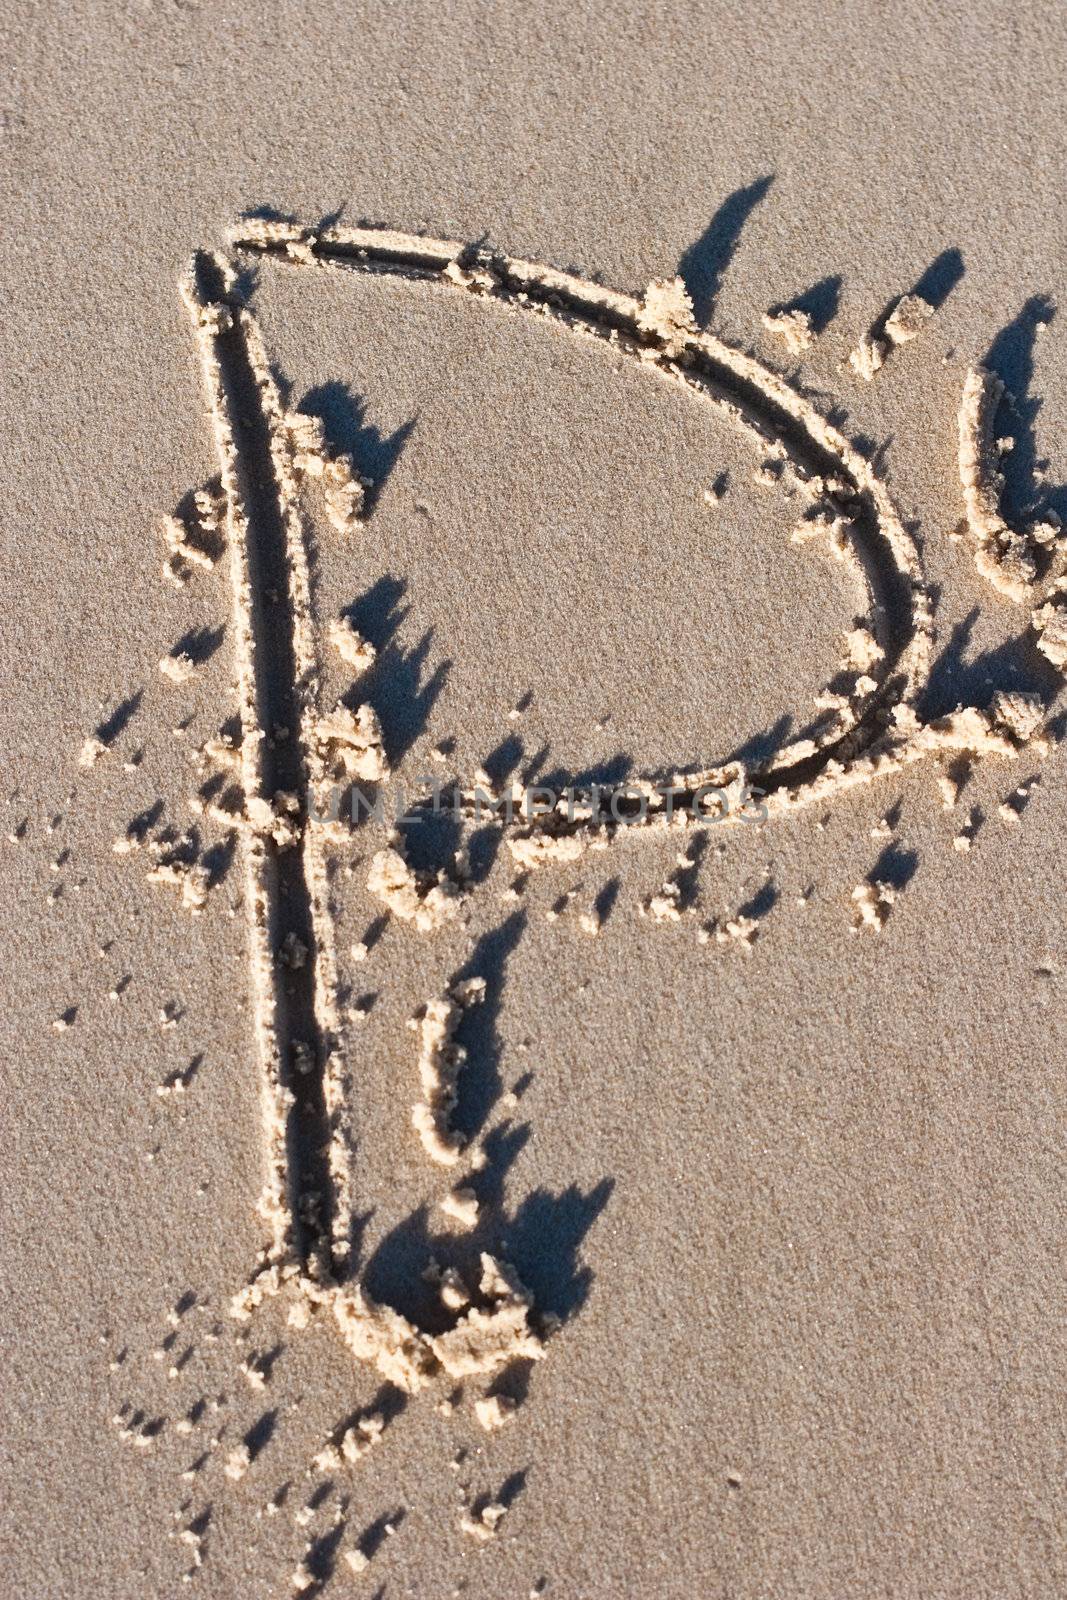 Letter P drawn in the sand. 